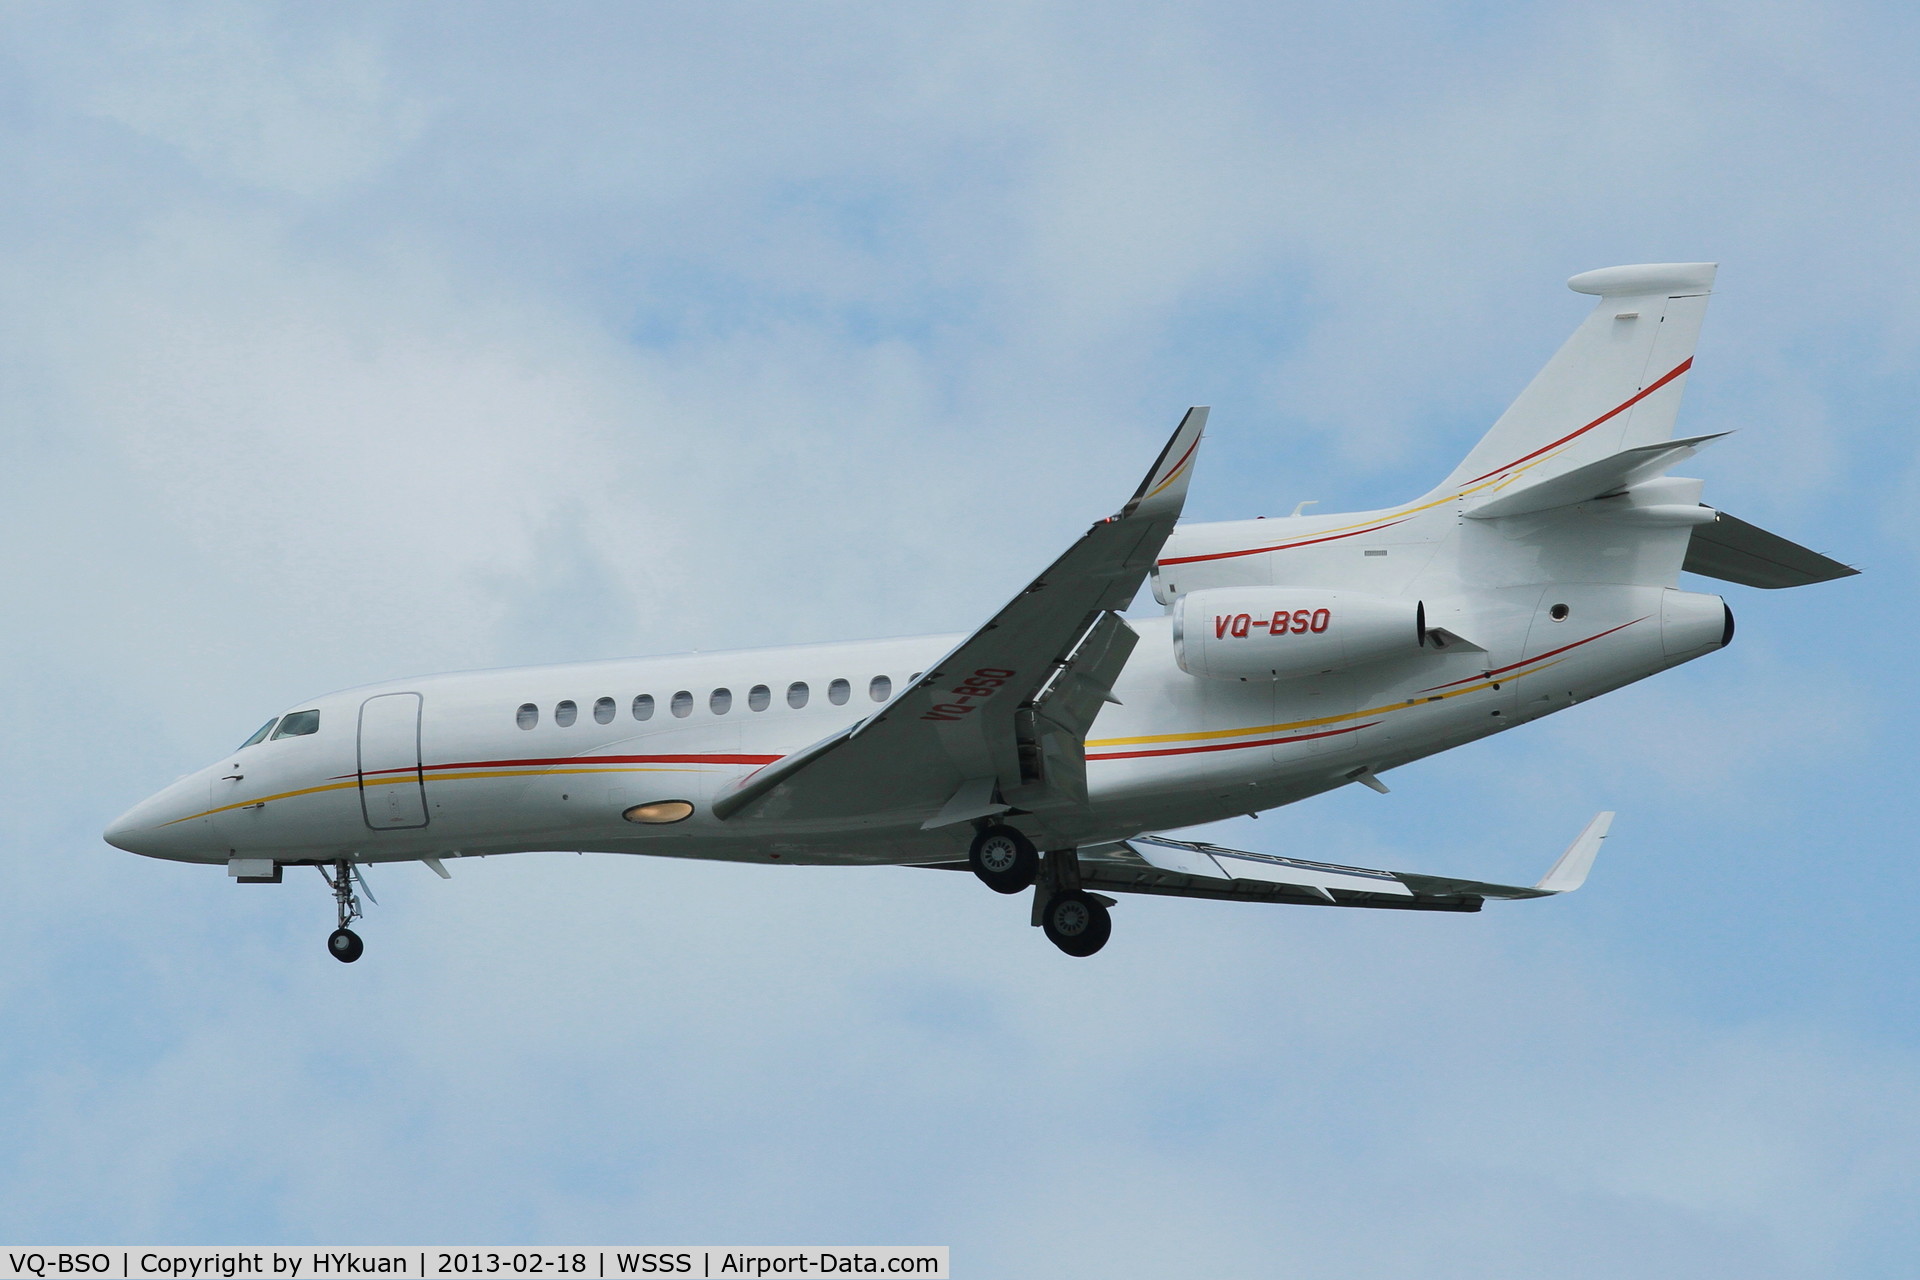 VQ-BSO, 2009 Dassault Falcon 7X C/N 064, my first catch of this Falcon 7X